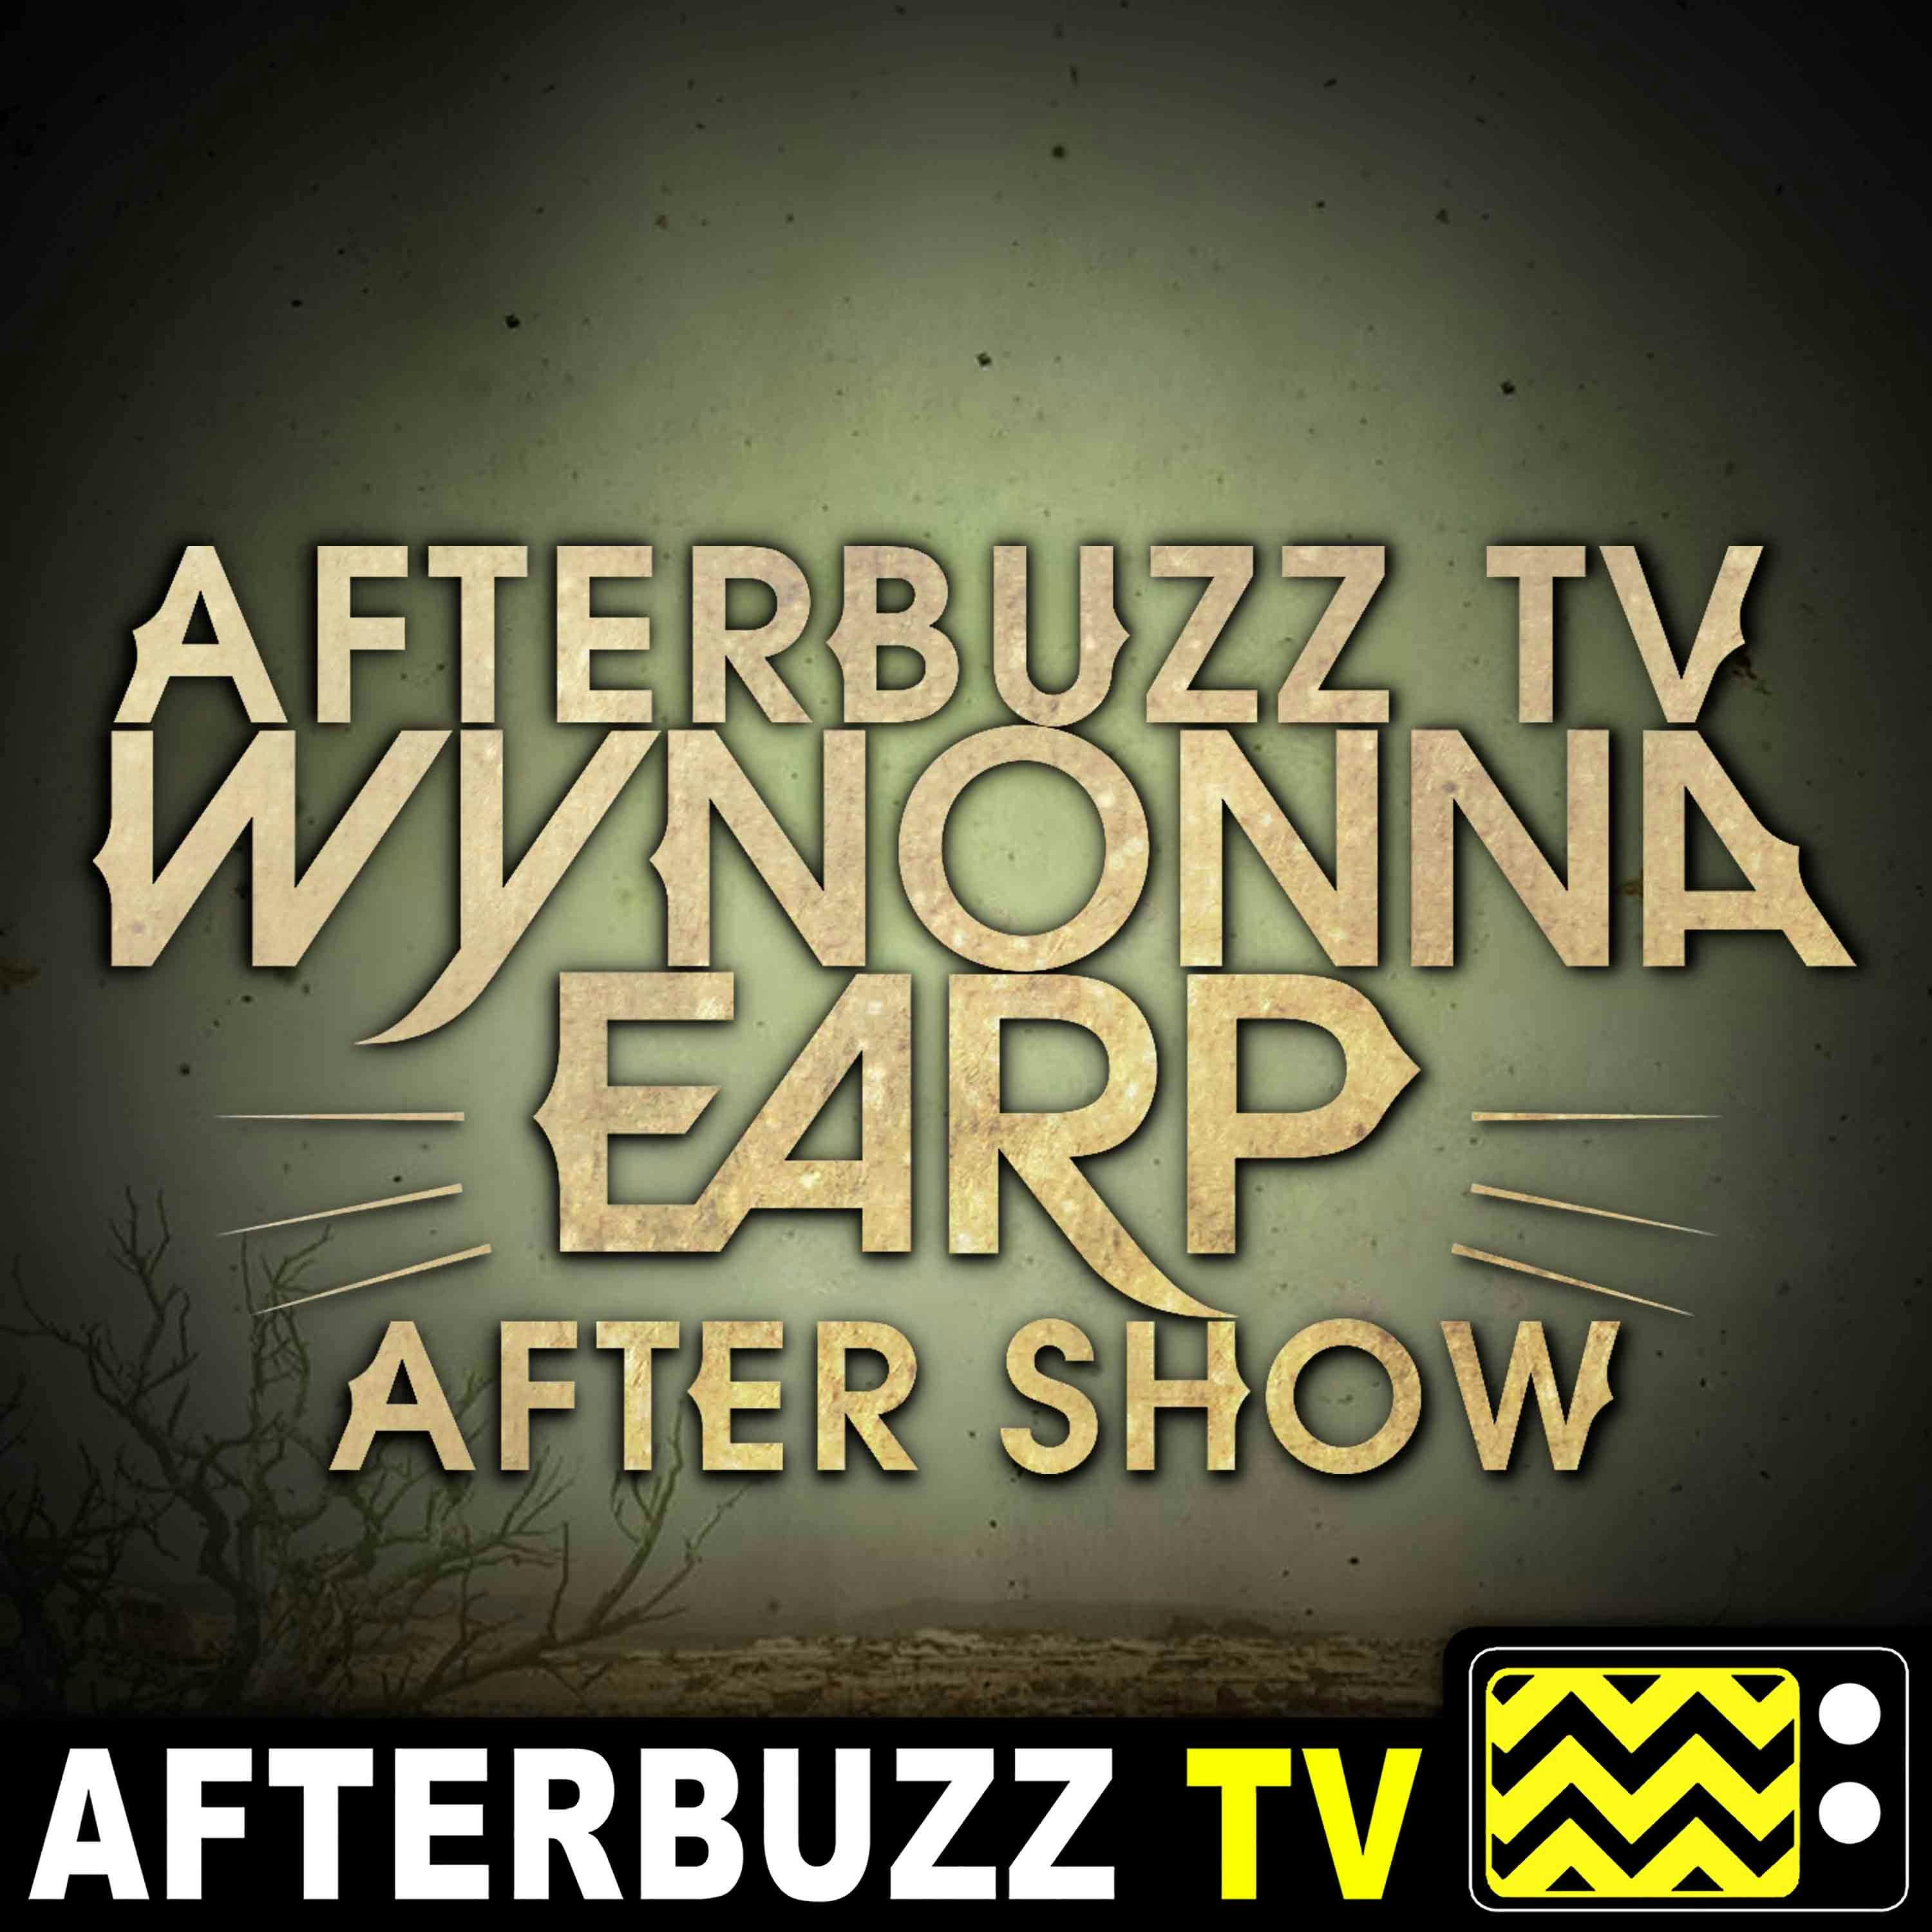 Wynonna Earp S:2 | Let’s Pretend We’re Strangers E:5 | AfterBuzz TV AfterShow